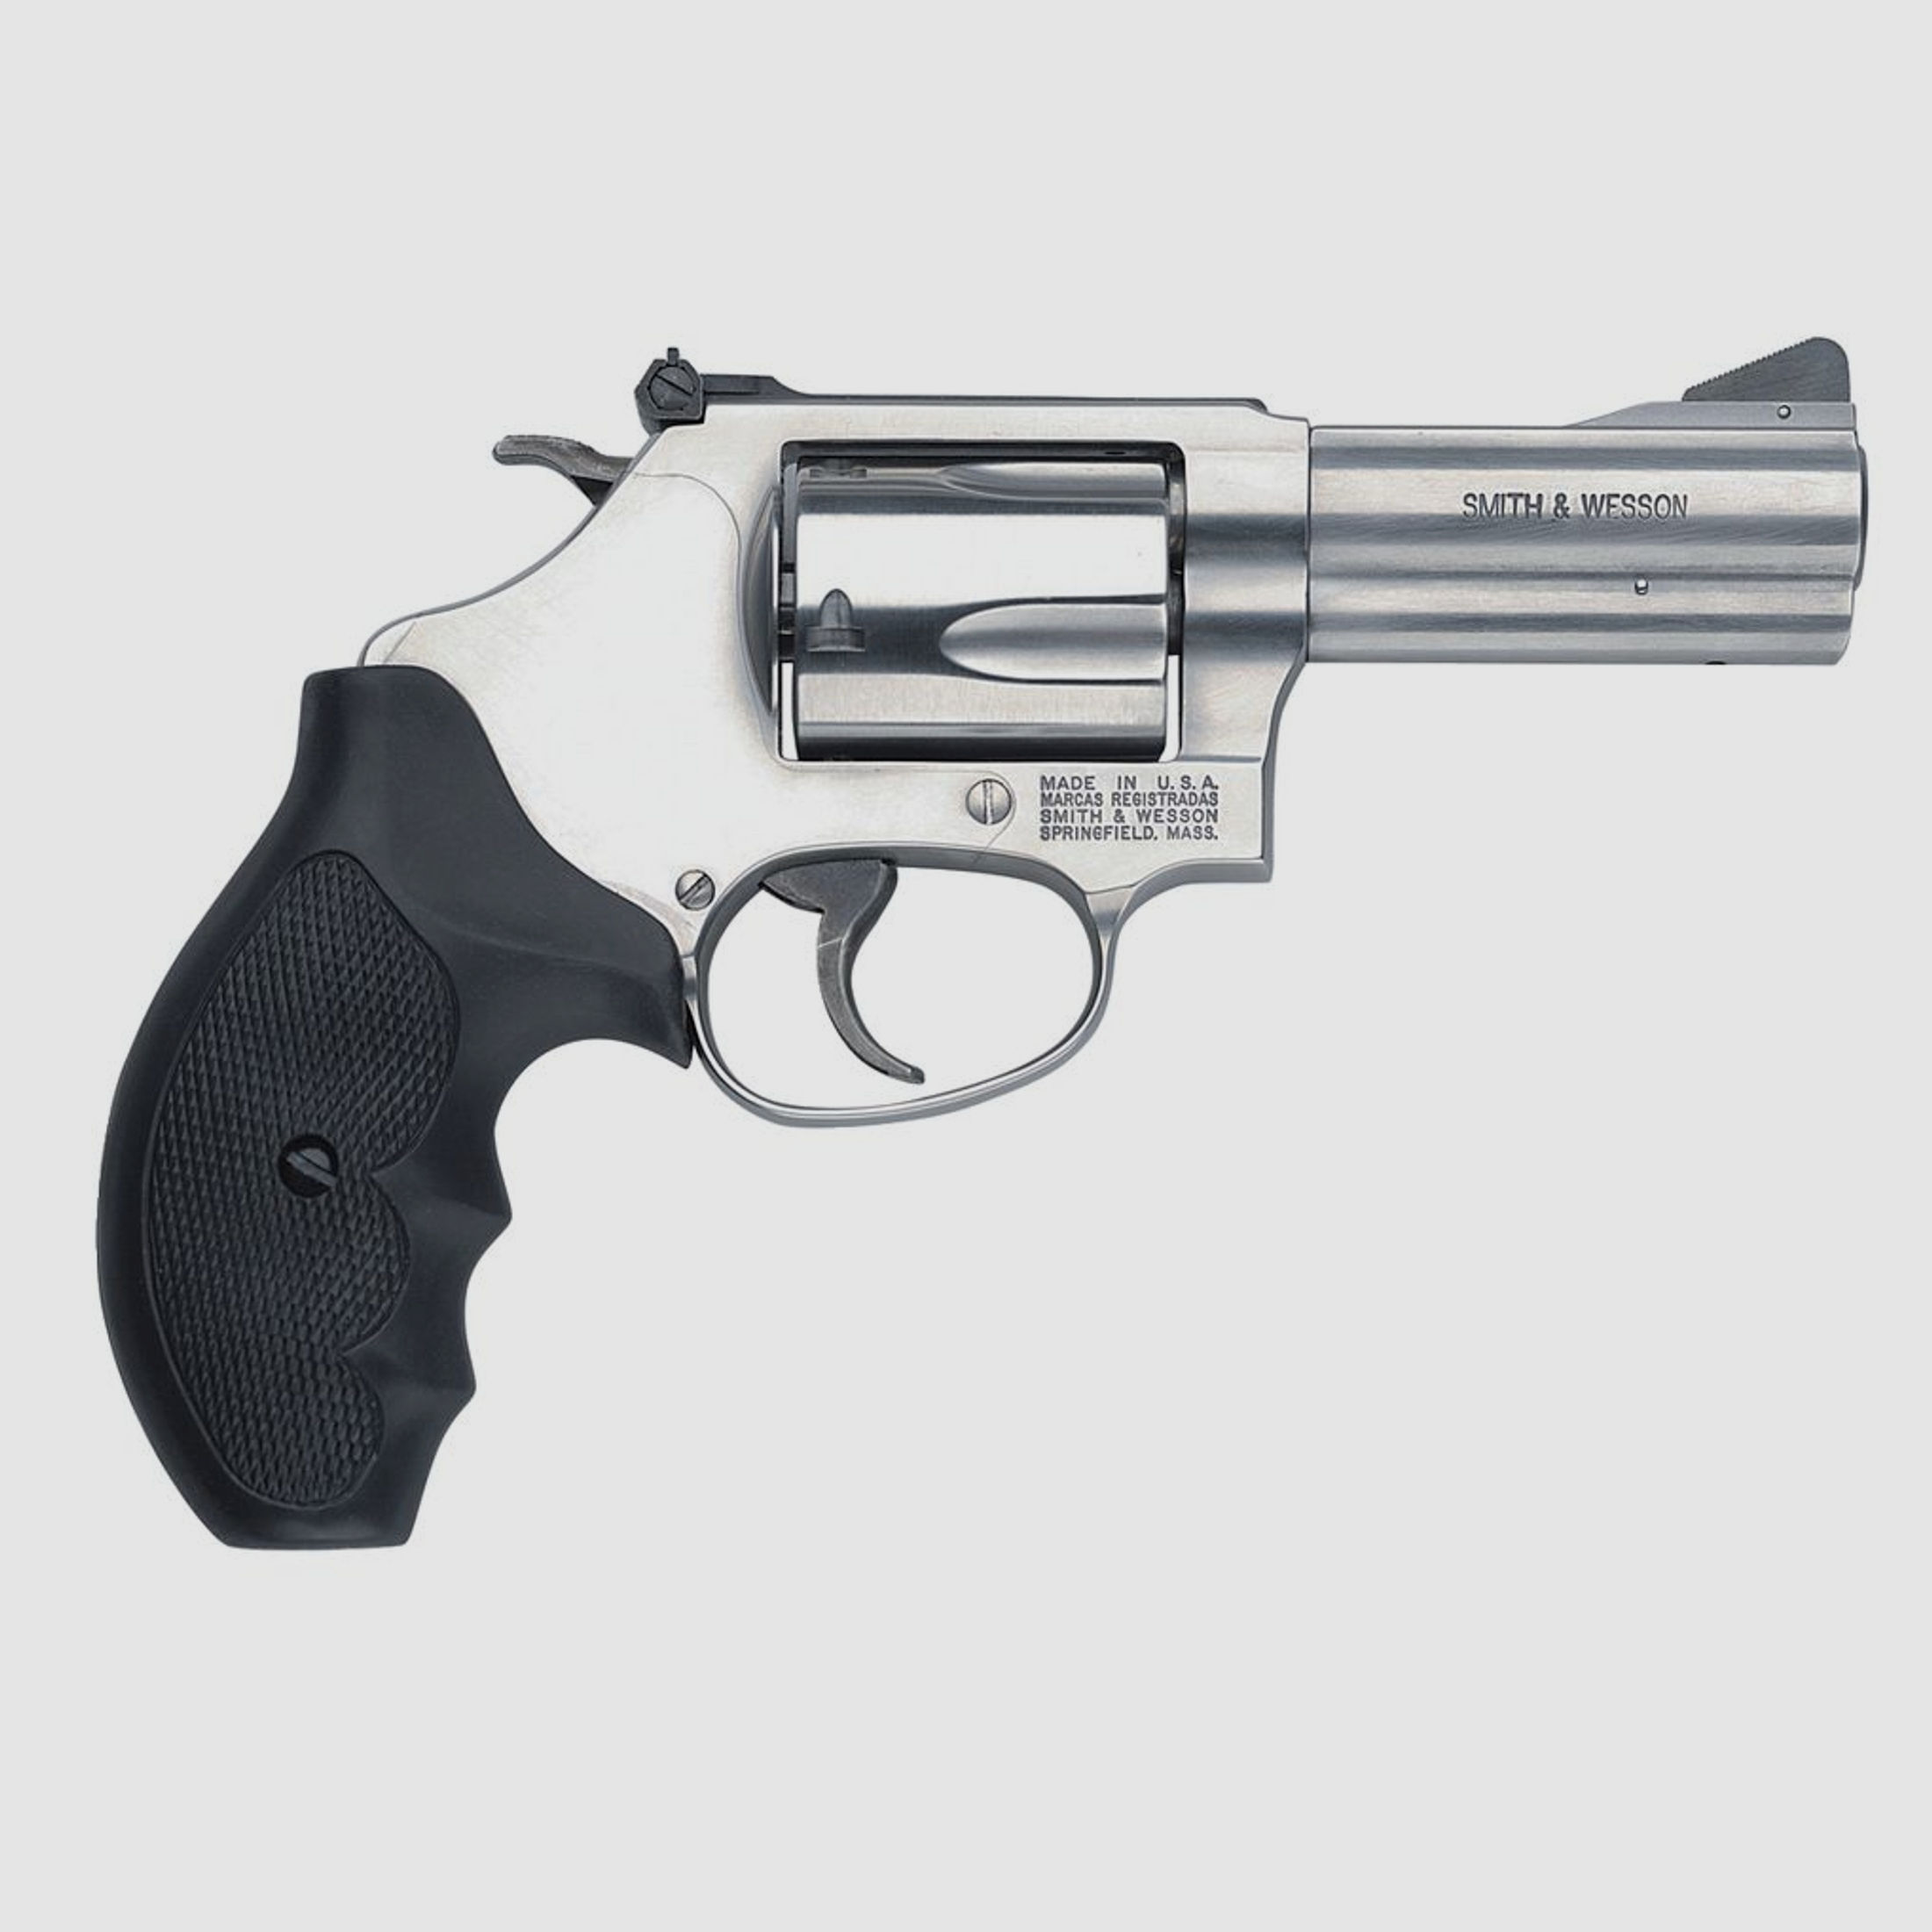 Smith & Wesson Modell 60 3"